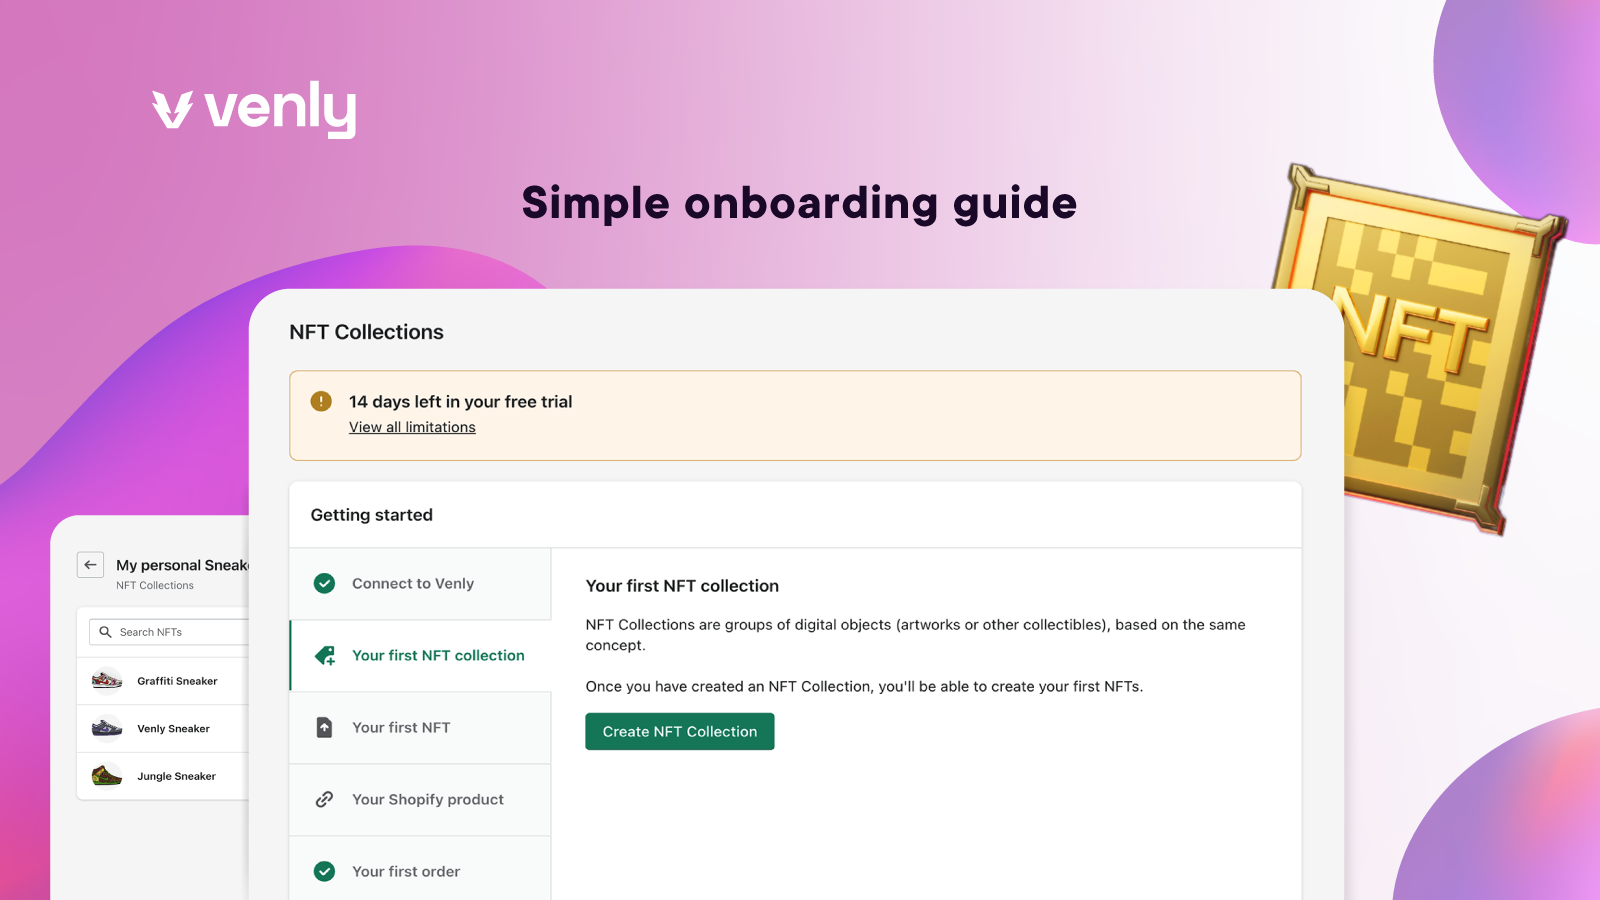 Simple onboarding guide into NFTs and Web3